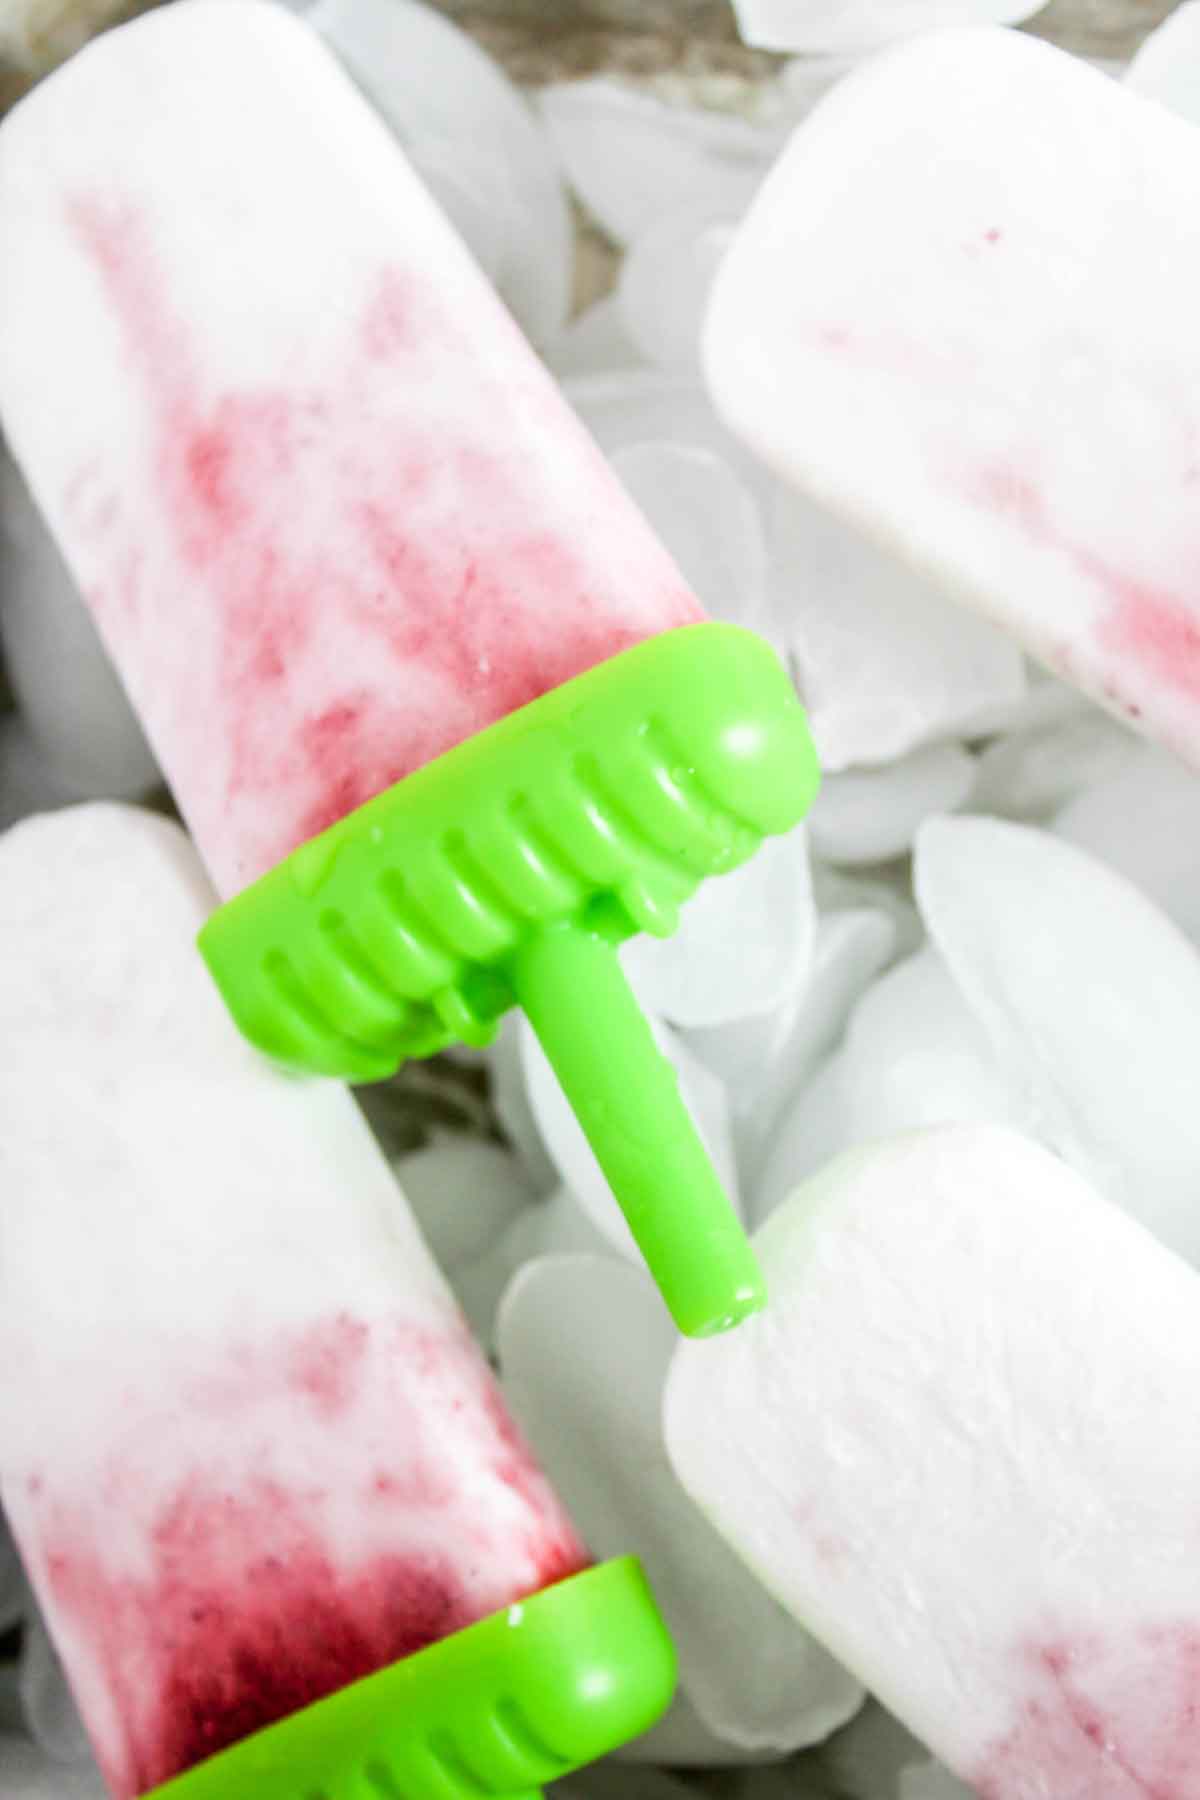 Strawberry Coconut Ice Pops close up with ice cubes